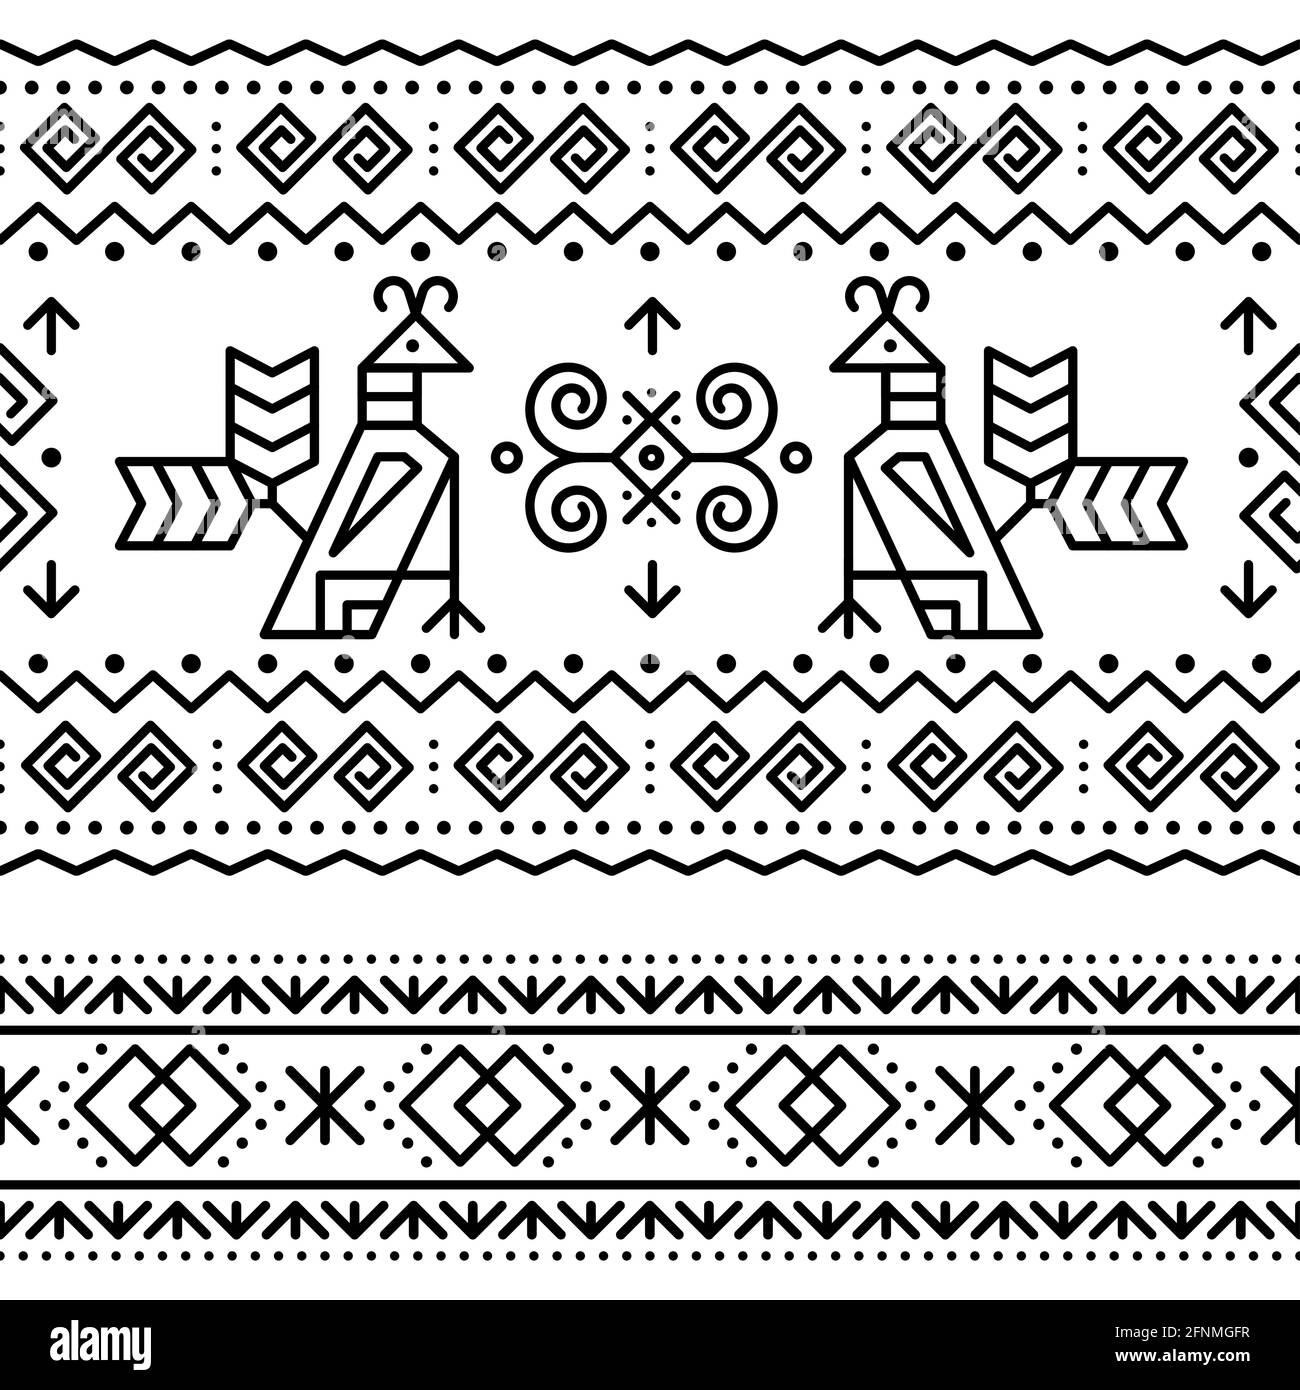 Slovak tribal folk art vector seamless geometric two black patterns with brids swirls, zig-zag shapes inspired by traditional painted art from village Stock Vector